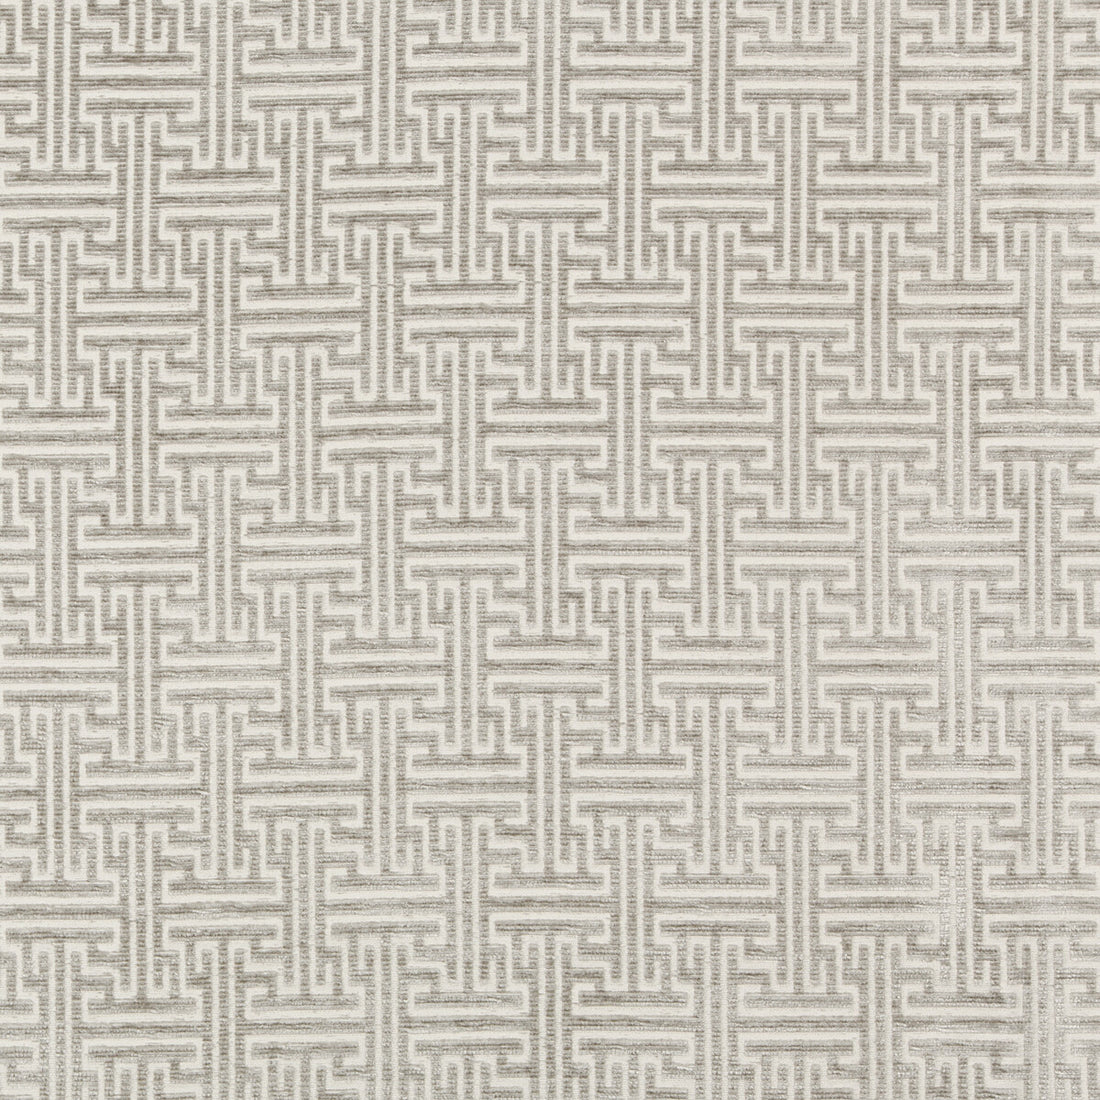 Guest House fabric in platinum color - pattern 35563.11.0 - by Kravet Couture in the Modern Colors-Sojourn Collection collection